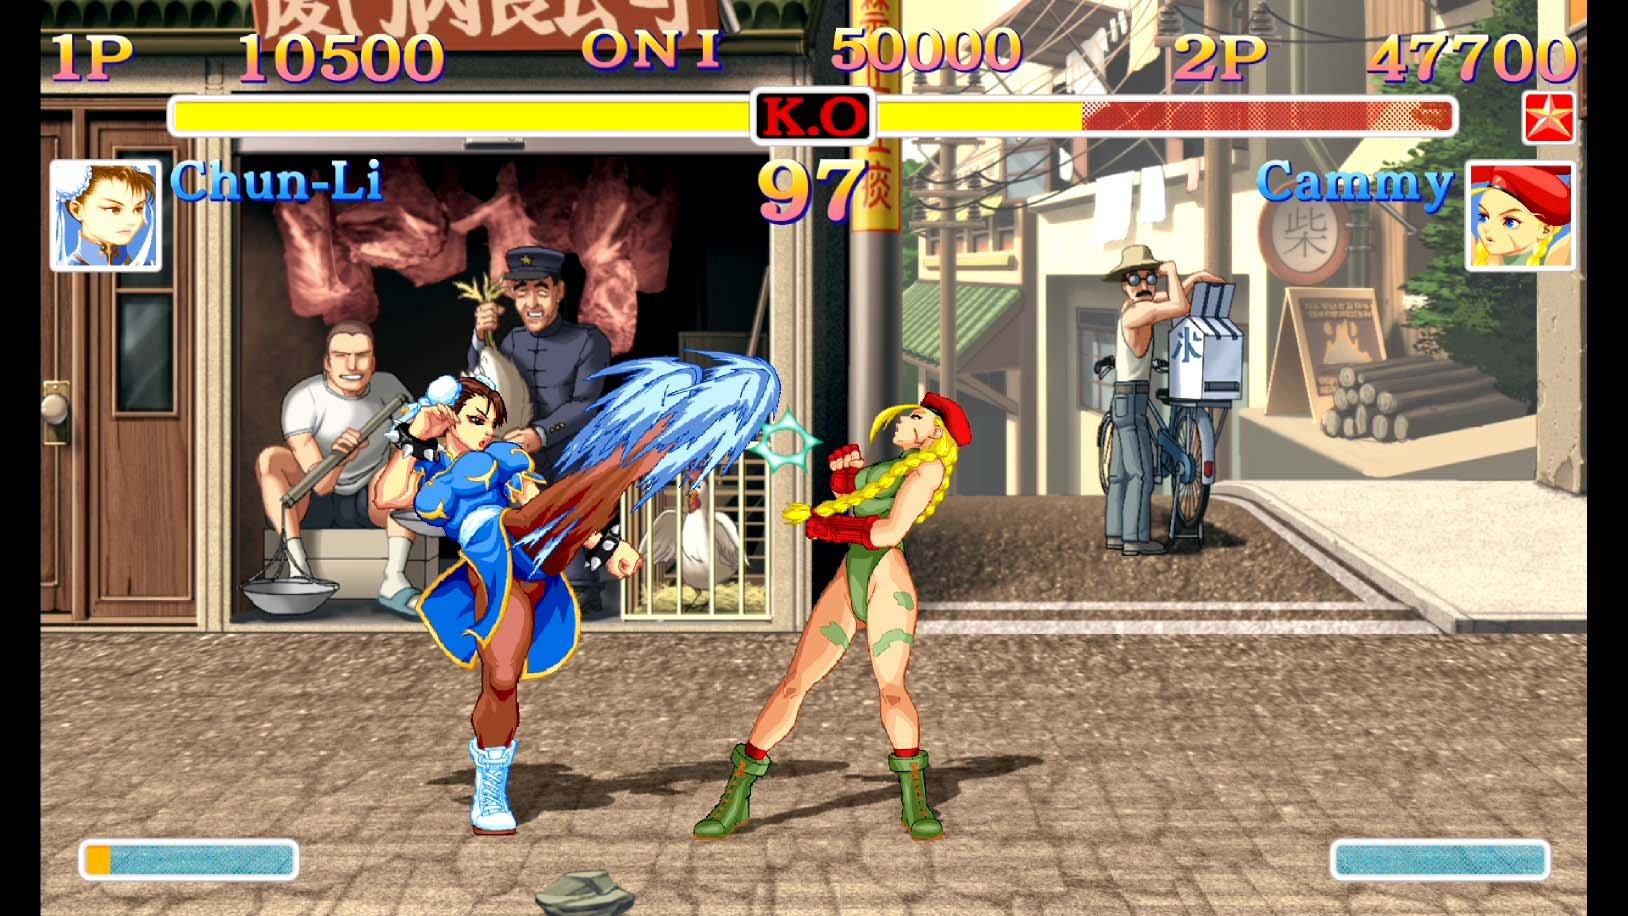 Ultra Street Fighter II review: Awful controls hamper Nintendo